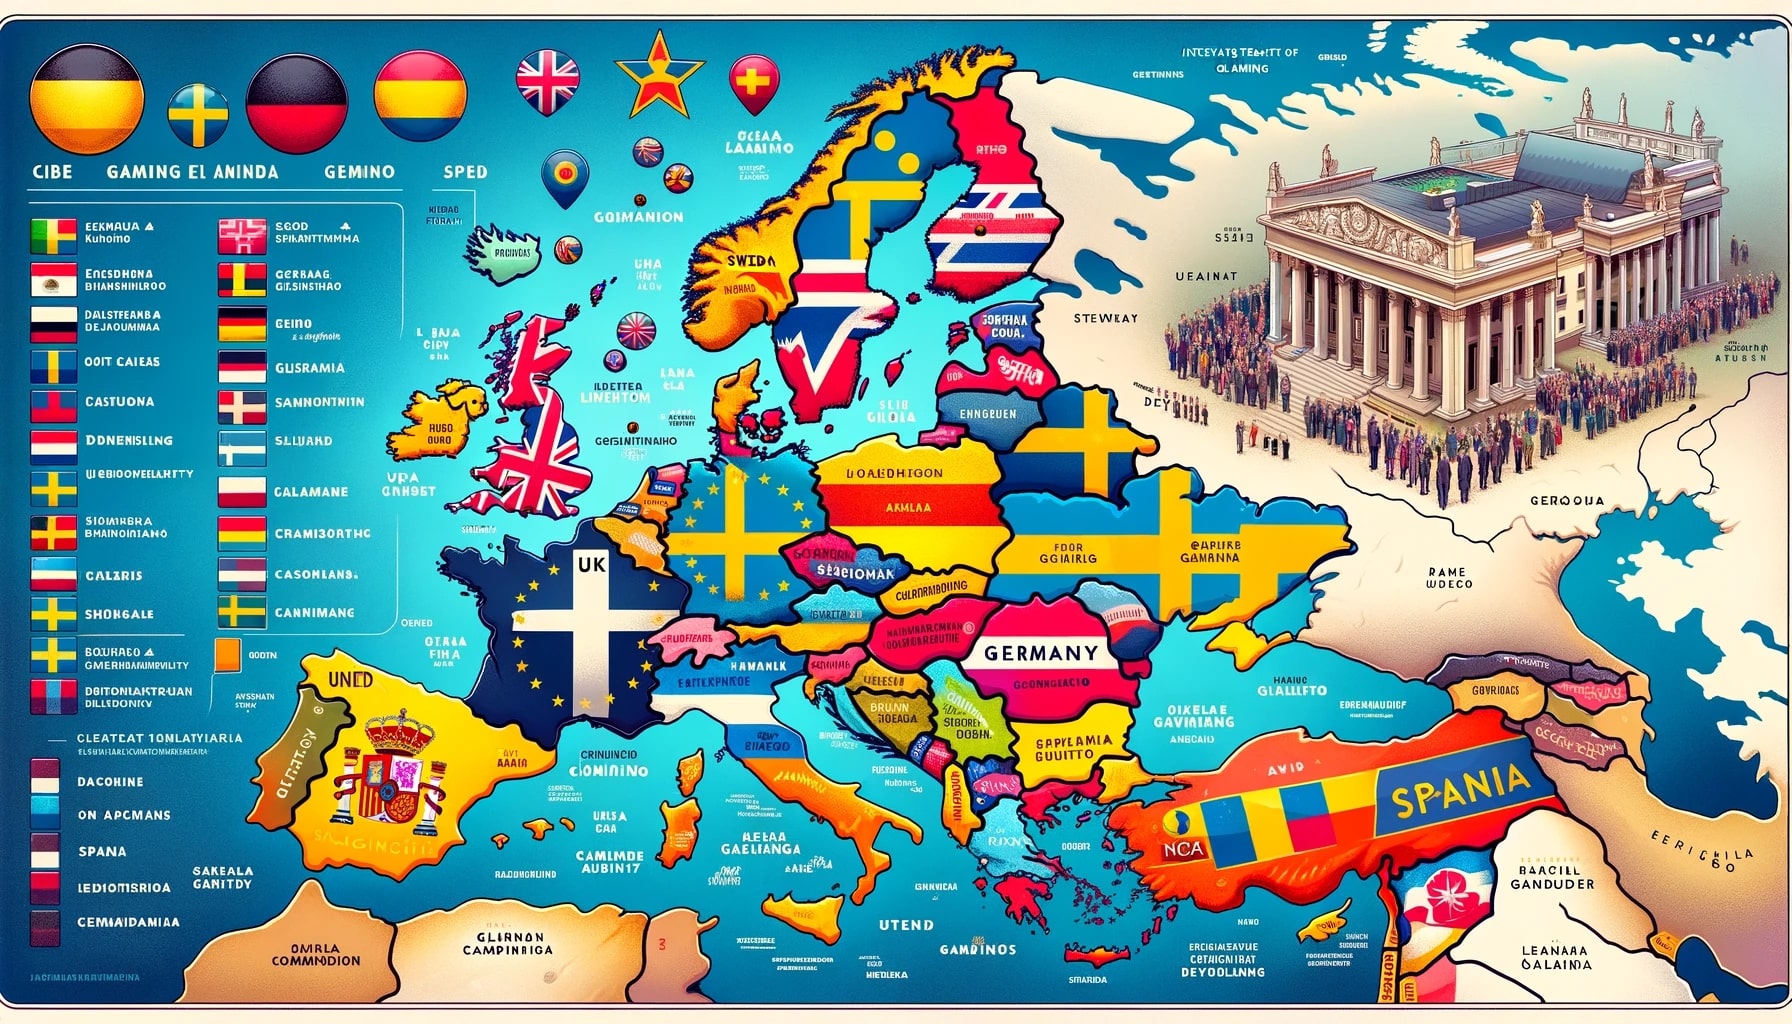 A map of Europe highlighting key countries with significant online casino markets and their respective regulatory bodies